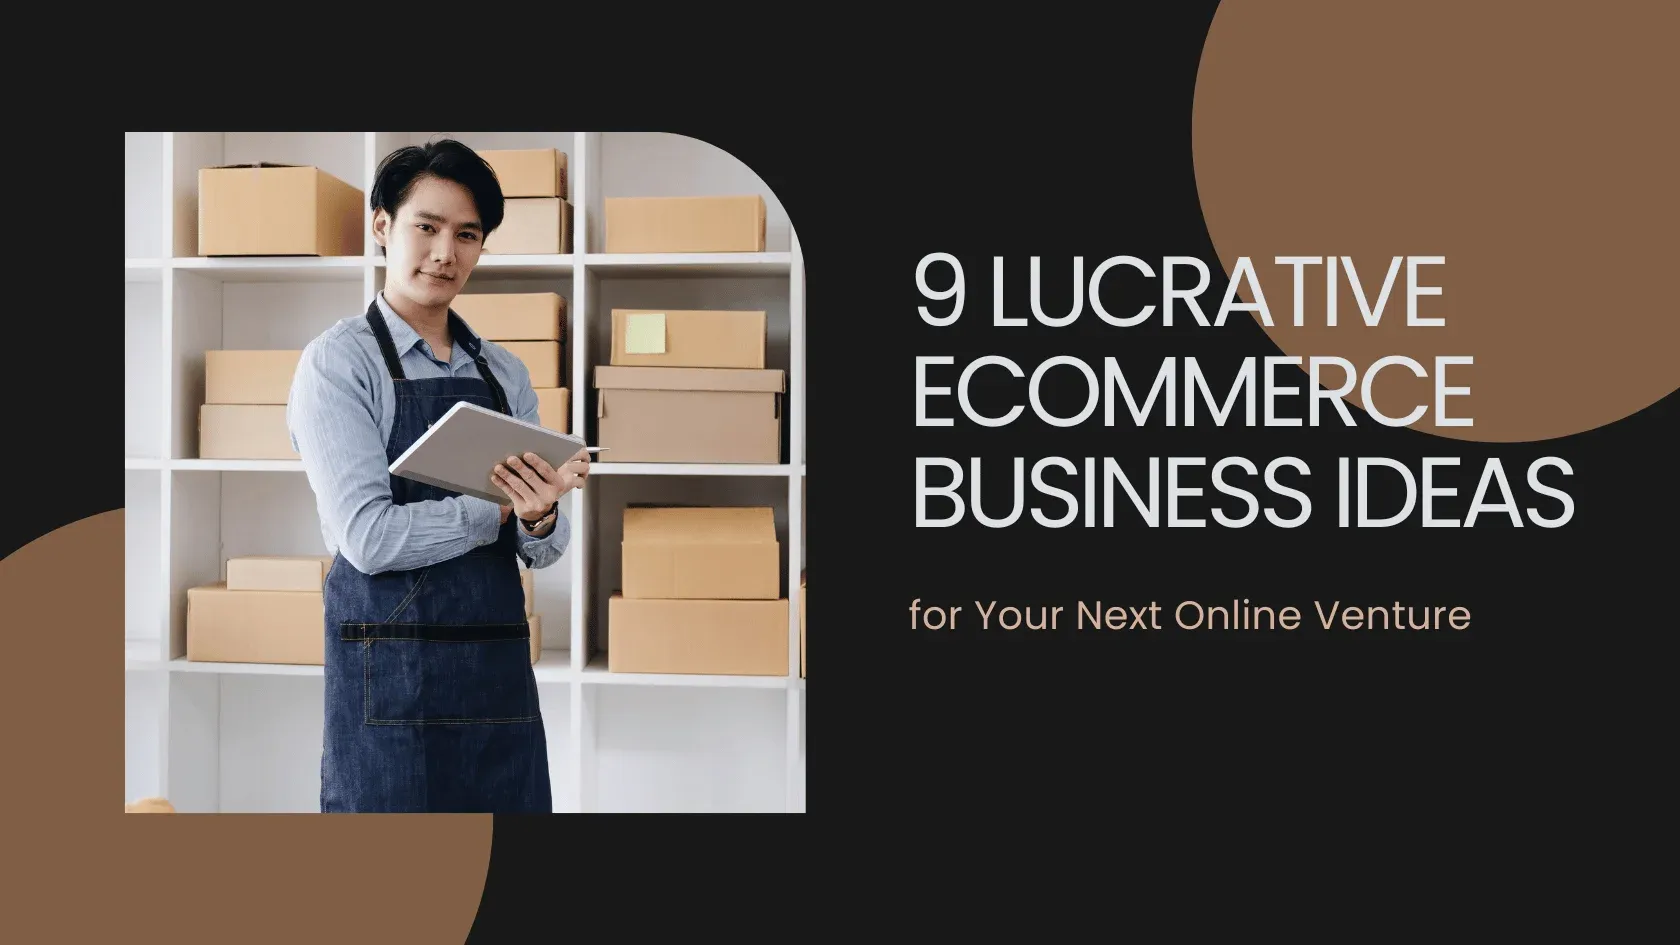 An infographic showing lucrative e-commerce business ideas for online ventures.